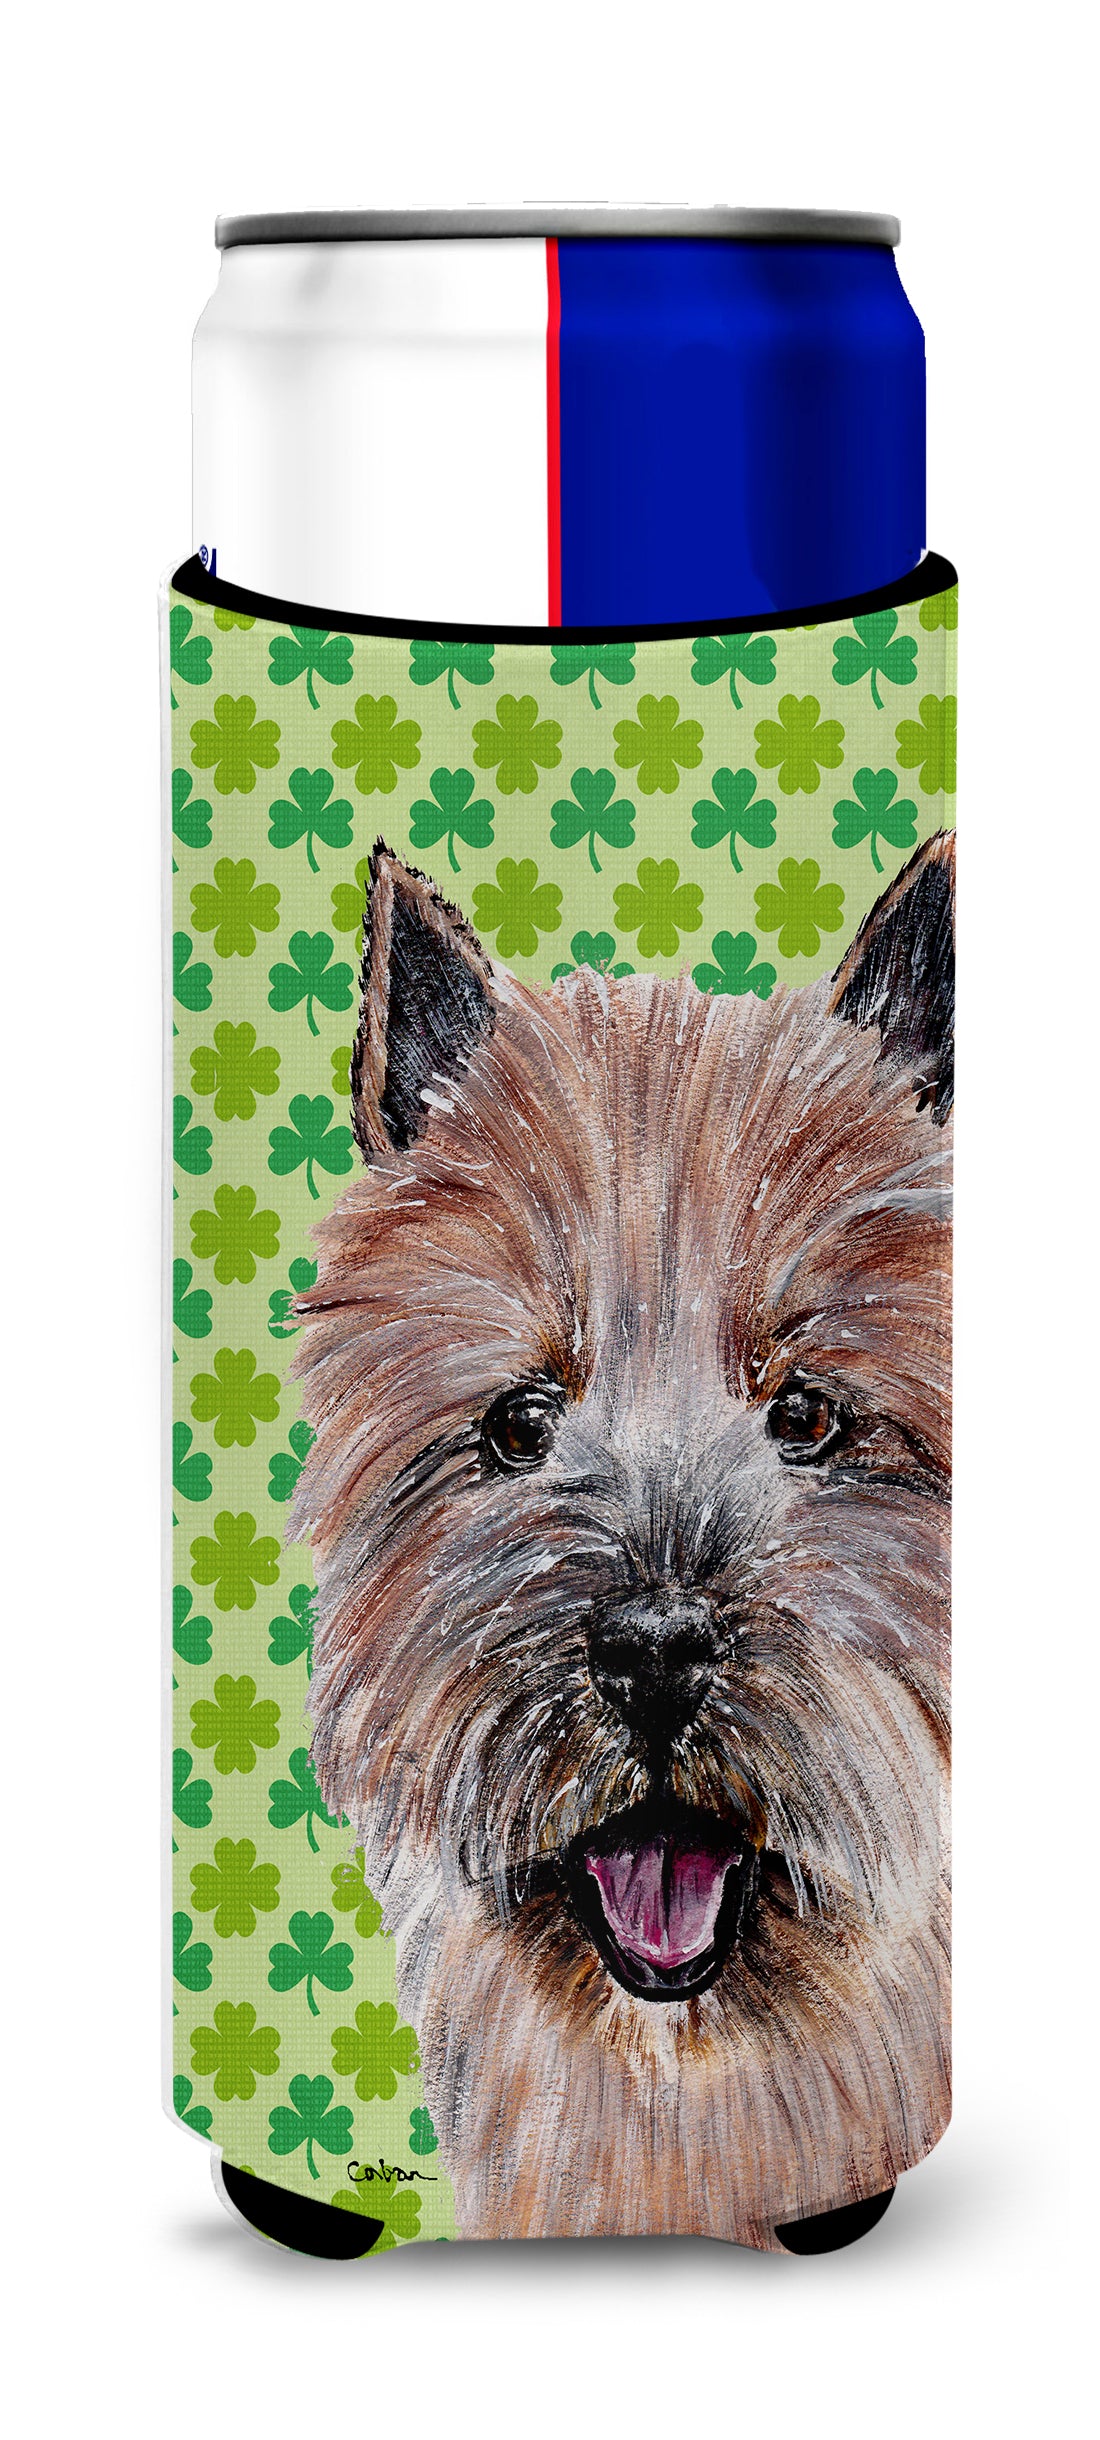 Norwich Terrier Lucky Shamrock St. Patrick's Day Ultra Beverage Insulators for slim cans SC9734MUK.